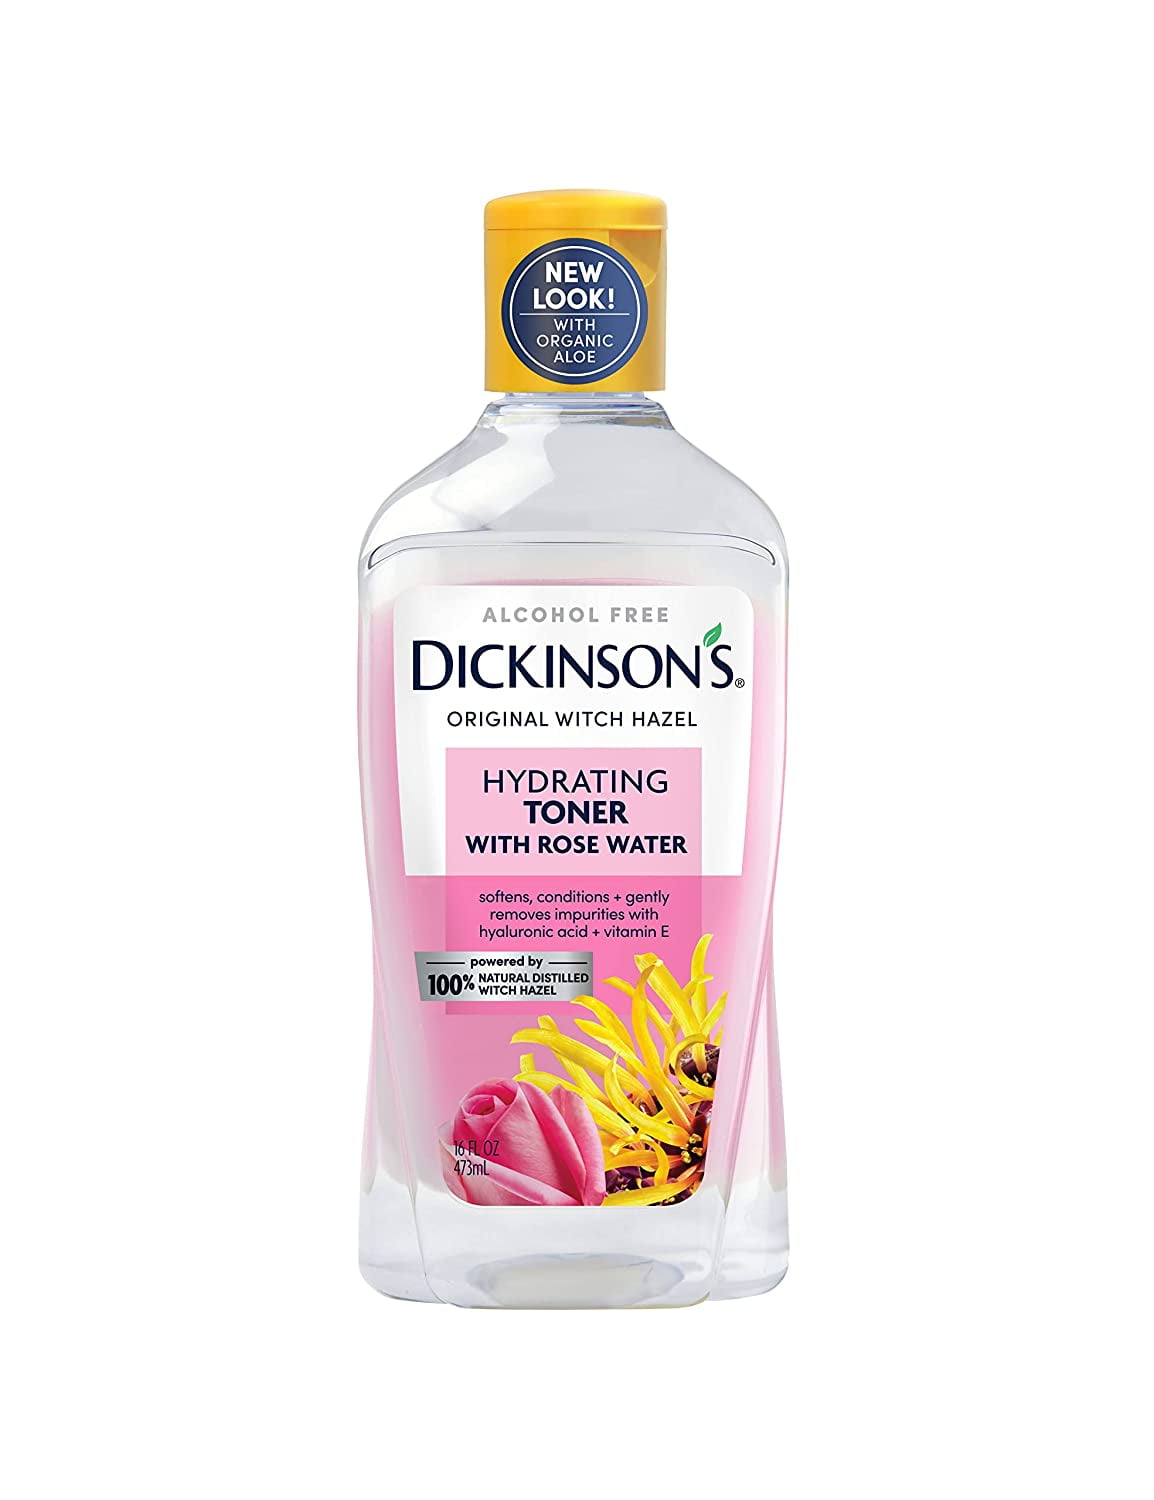 Dickinson's Enhanced Witch Hazel Hydrating Toner with Rosewater, Alcohol Free, 98% Natural Formula, 16 fl oz